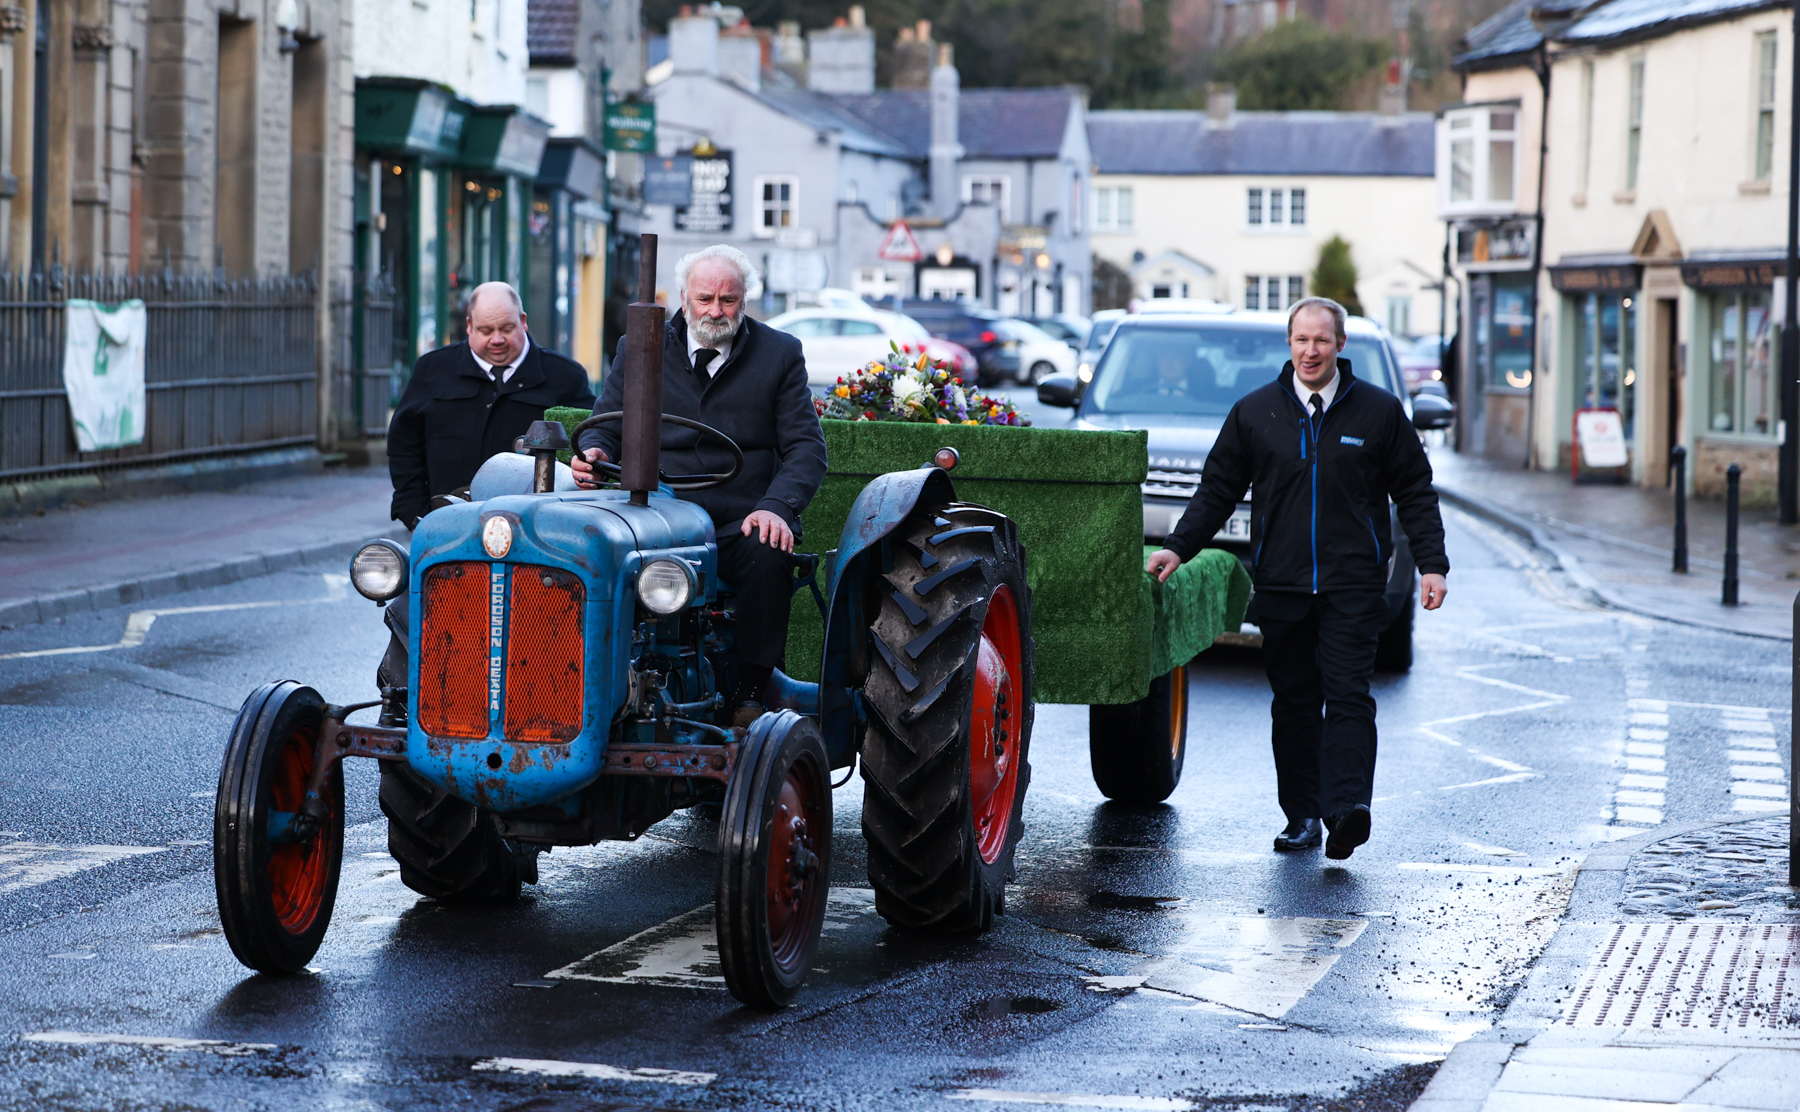 The funeral of local farmer John Metcalfe takes place in Leyburn, North Yorkshire with the service at St Matthew’s Church in the town.